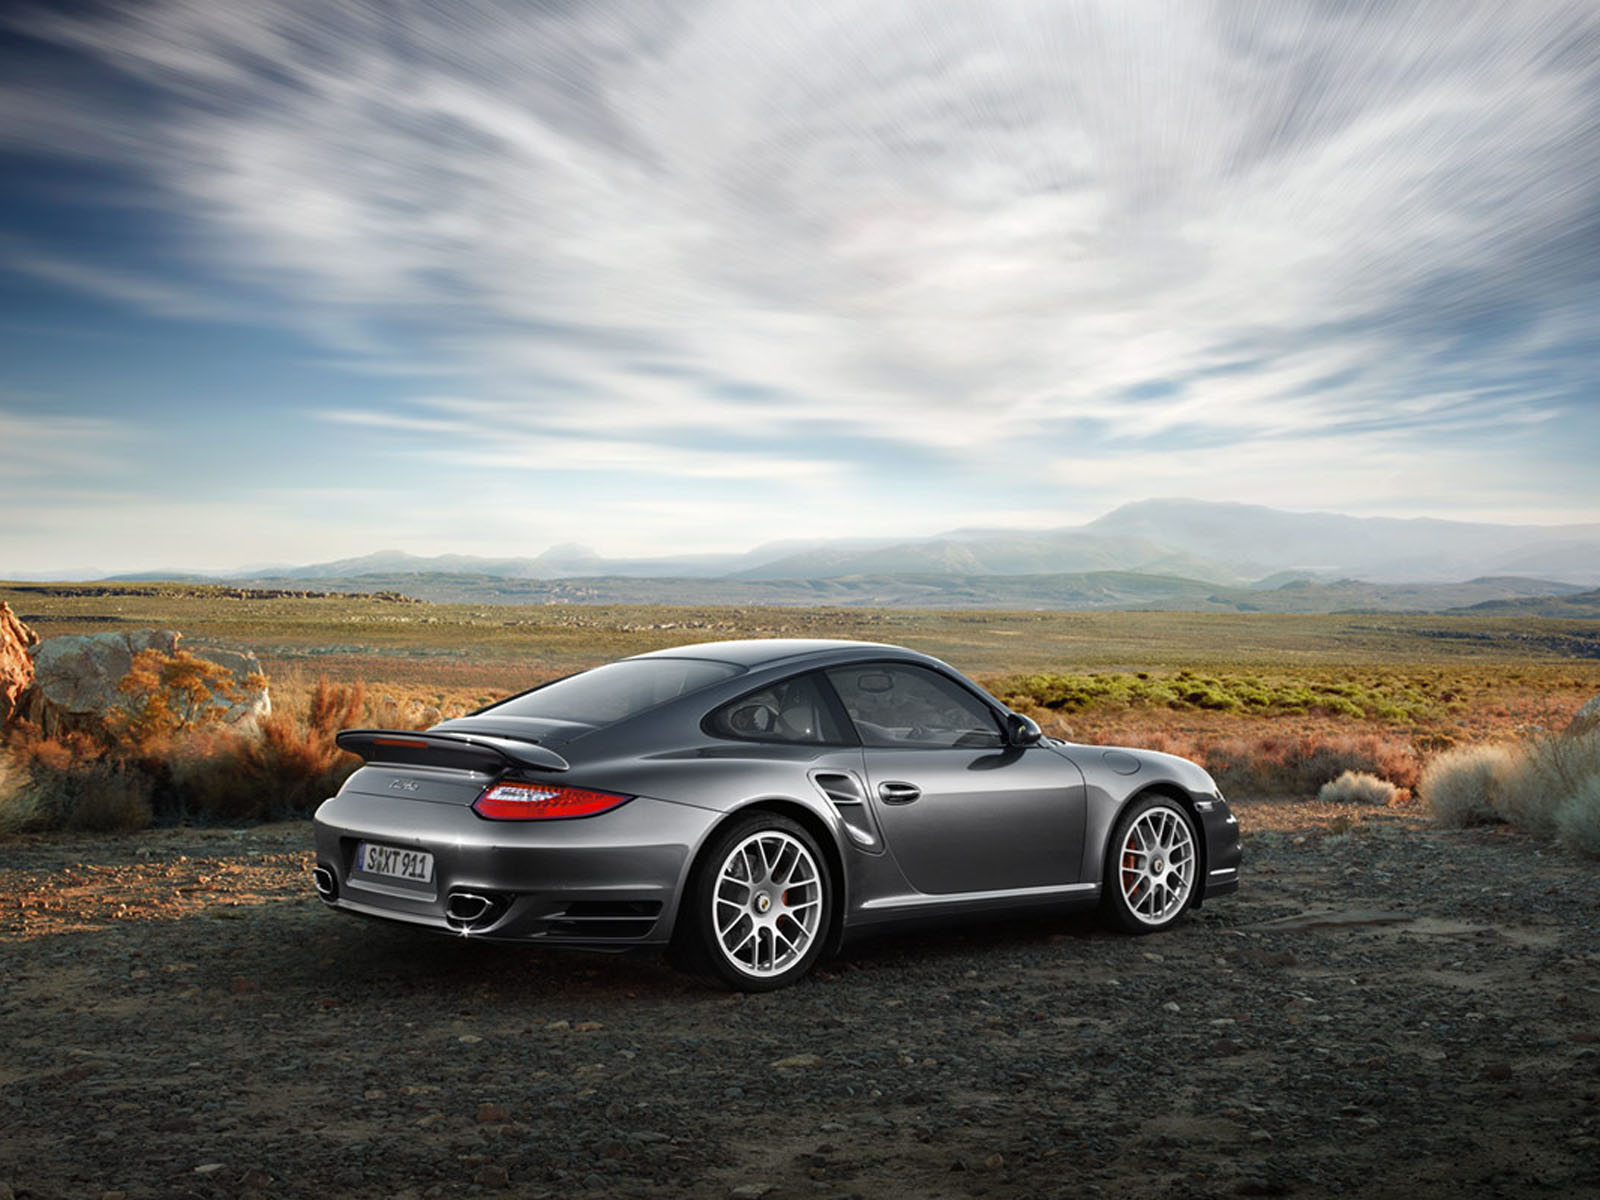 Tag Porsche 911 Turbo Car Wallpapers Backgrounds PhotosImages and